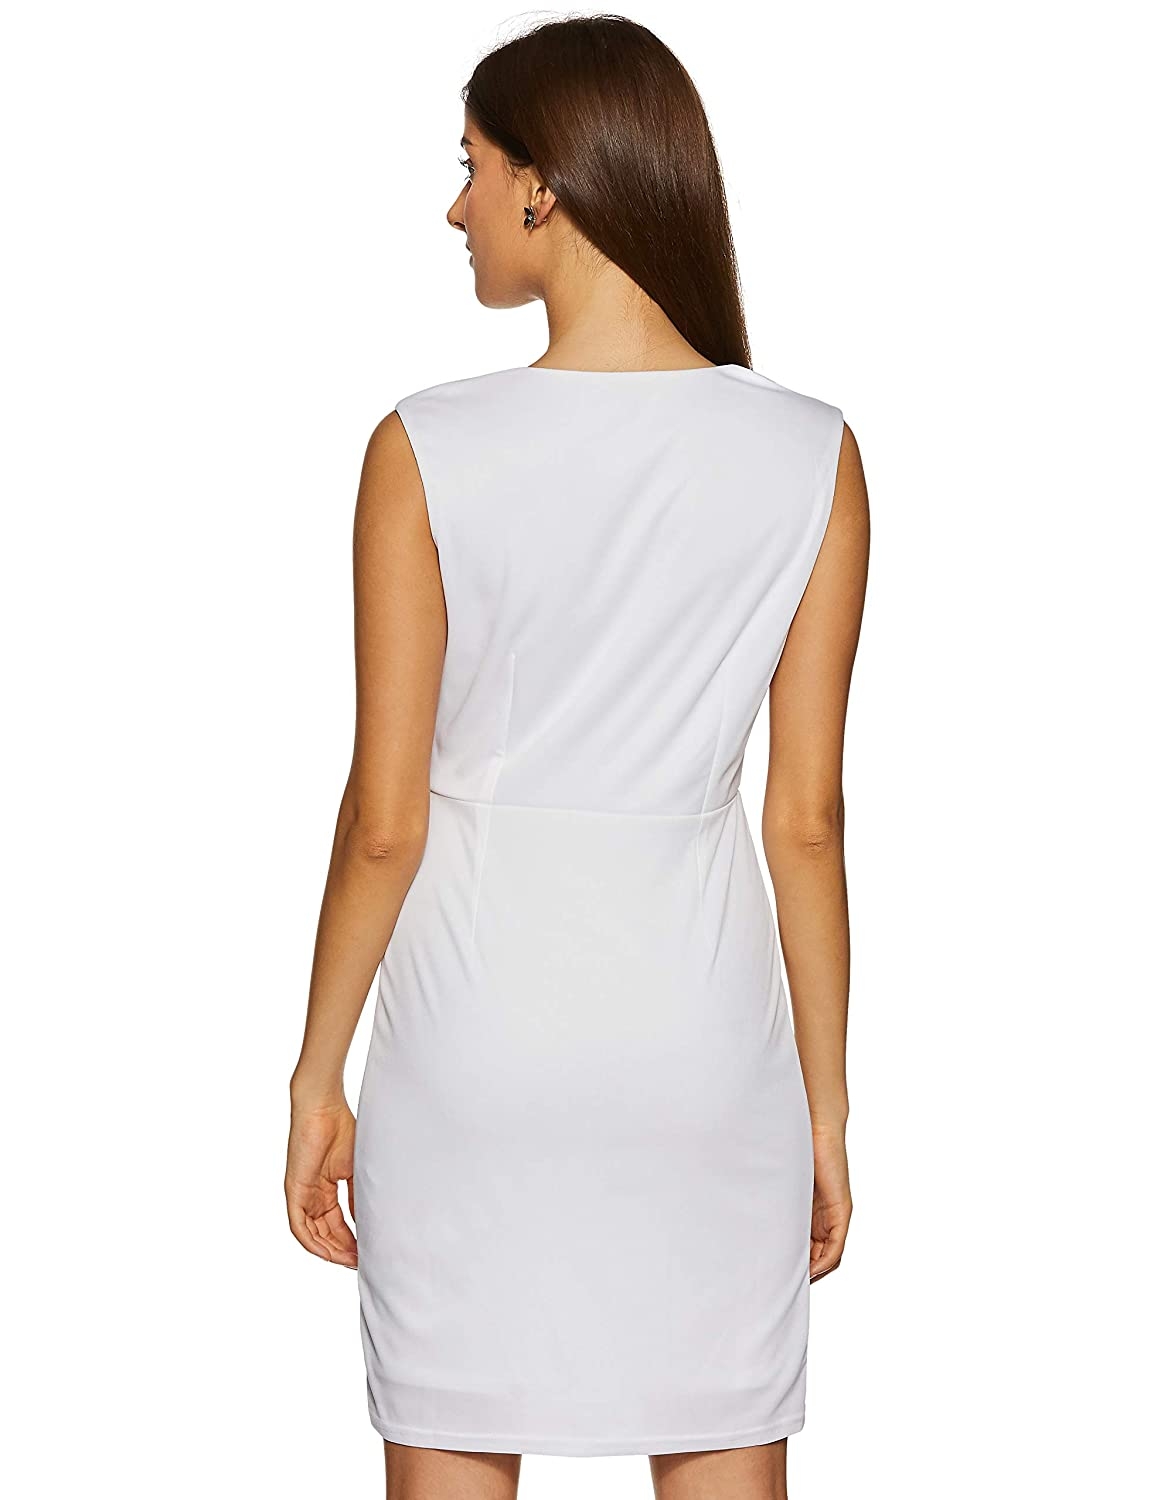 LY2 | LY2 embroidered detail v-neck bodycon Dress 1